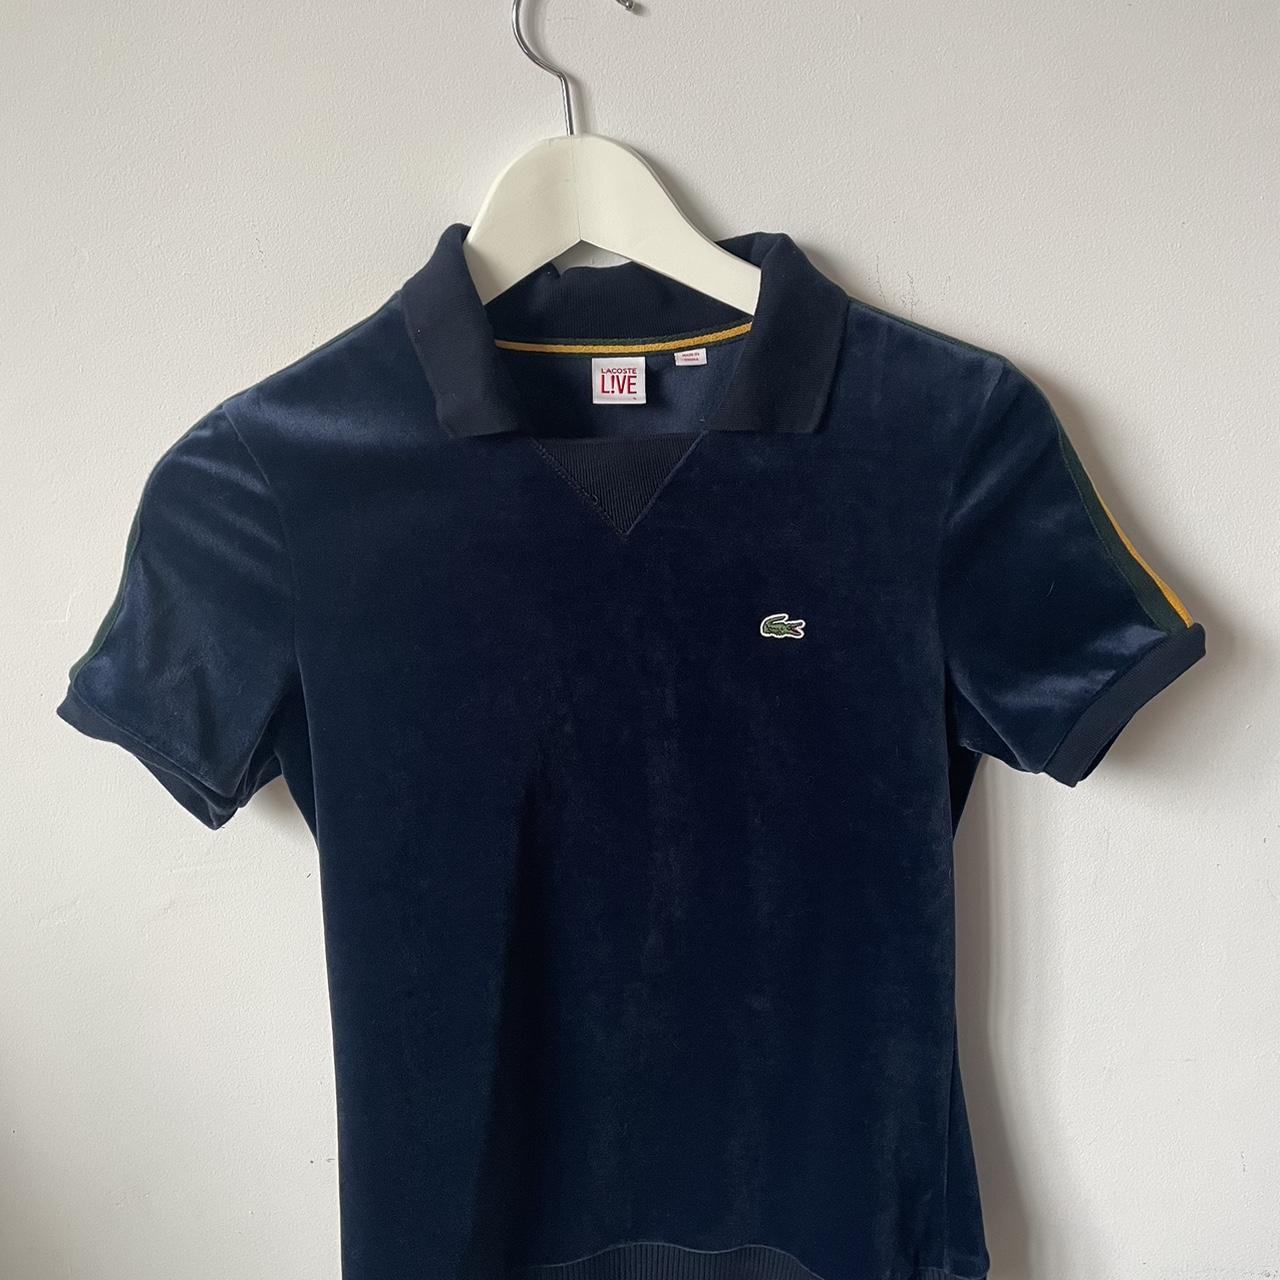 Lacoste Live Women's Navy and Yellow Polo-shirts (3)